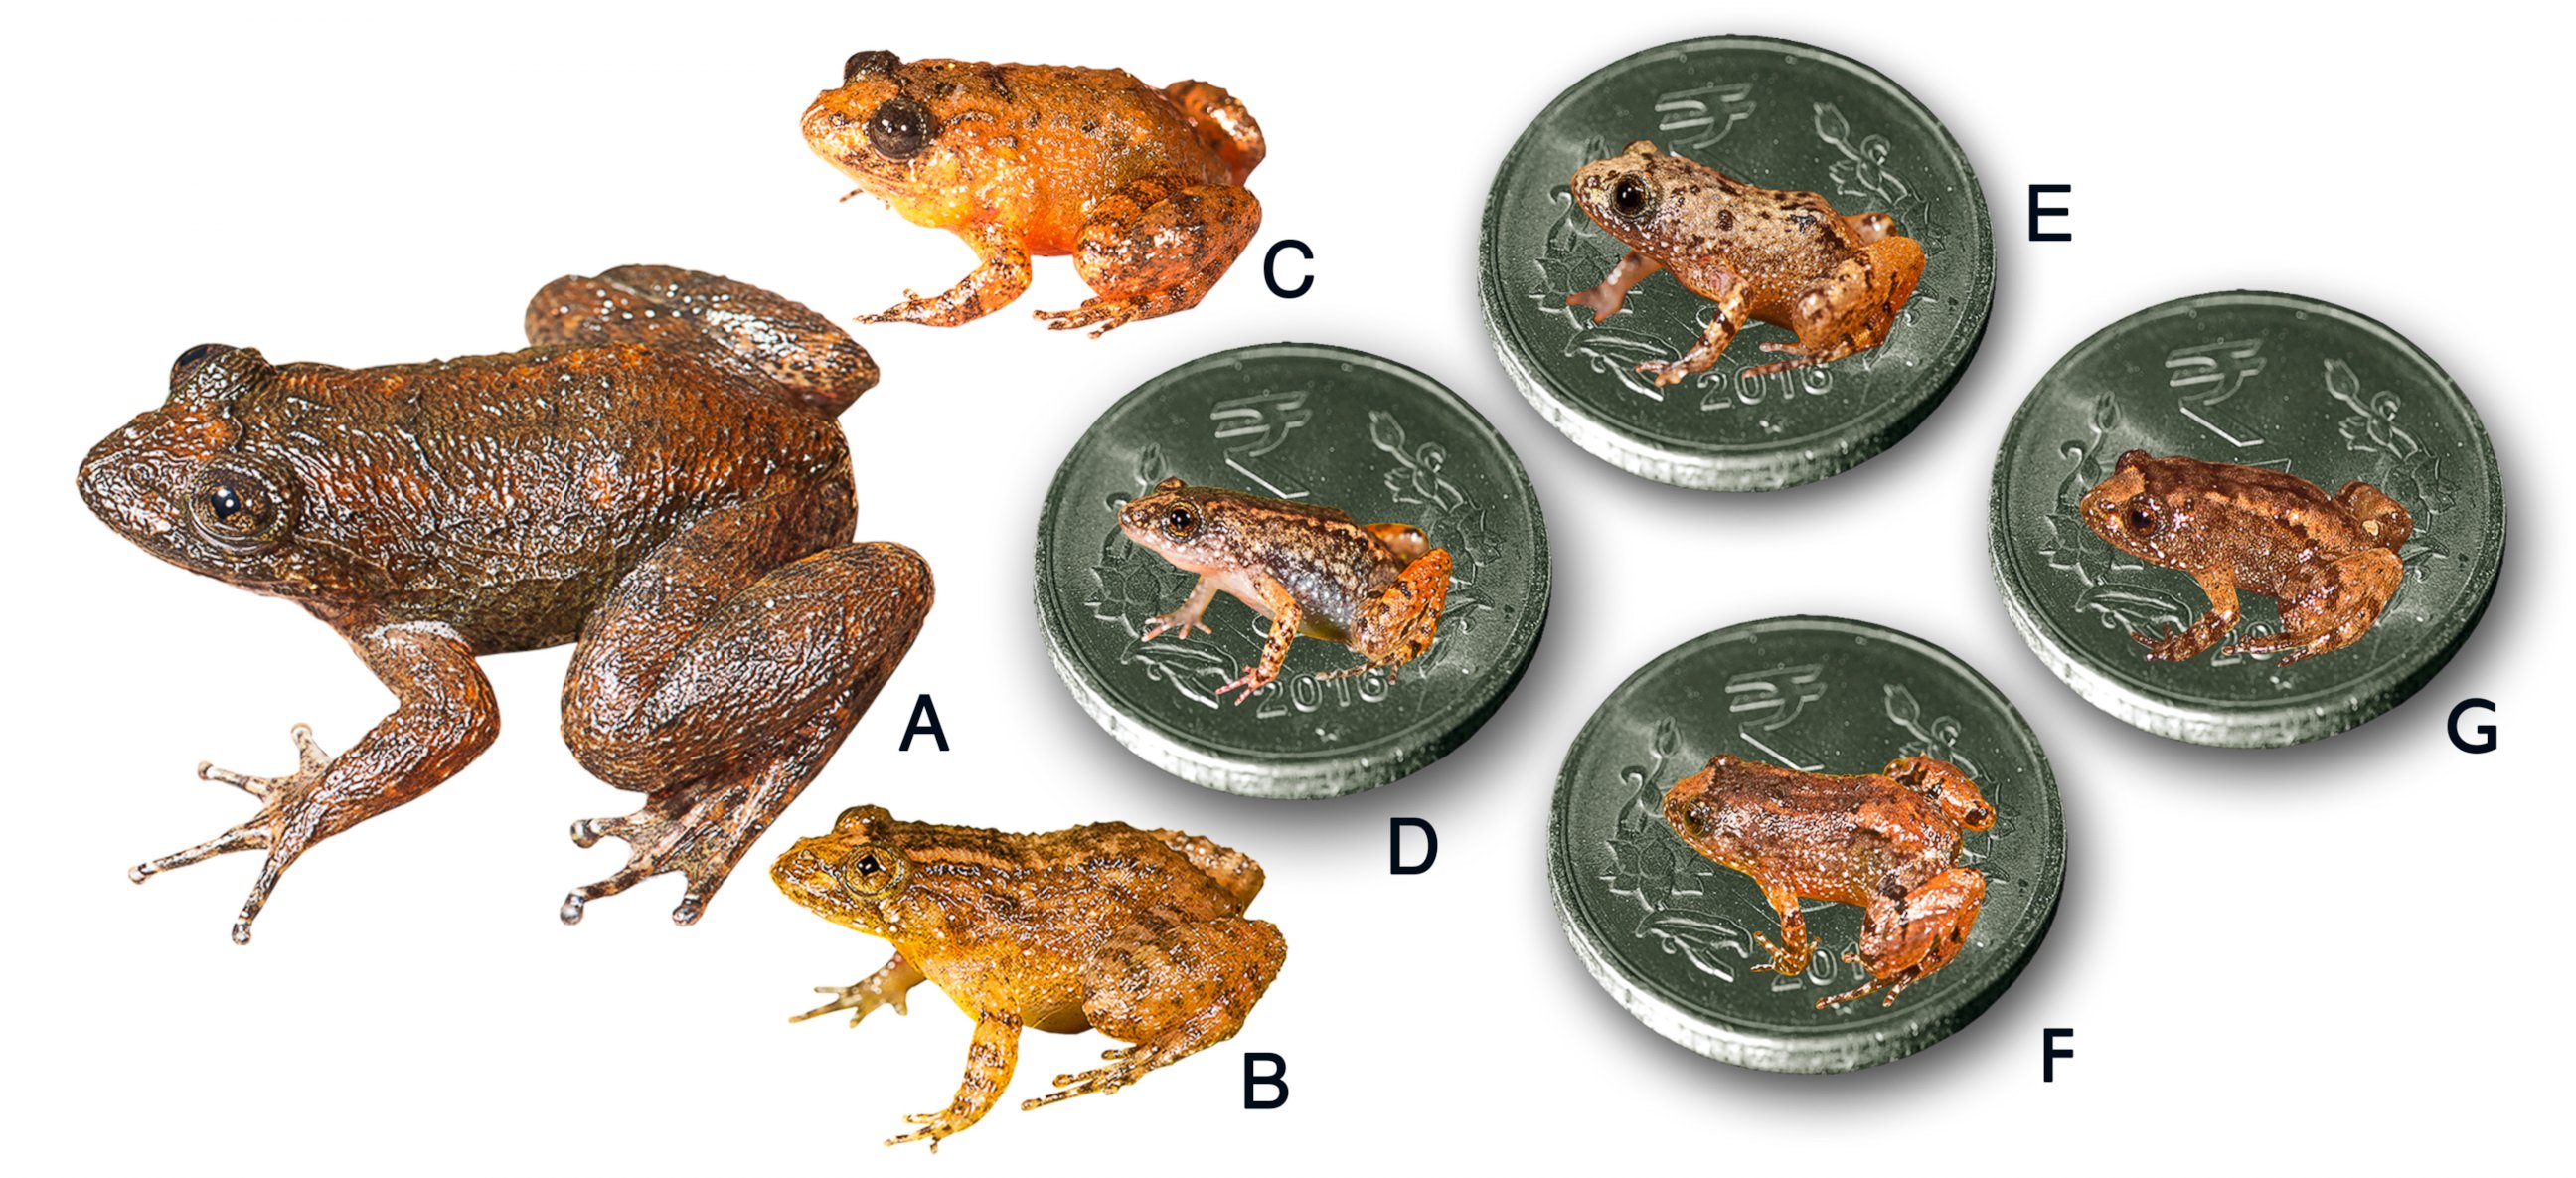 PHOTO: Seven new species discovered from the Western Ghats, India. 